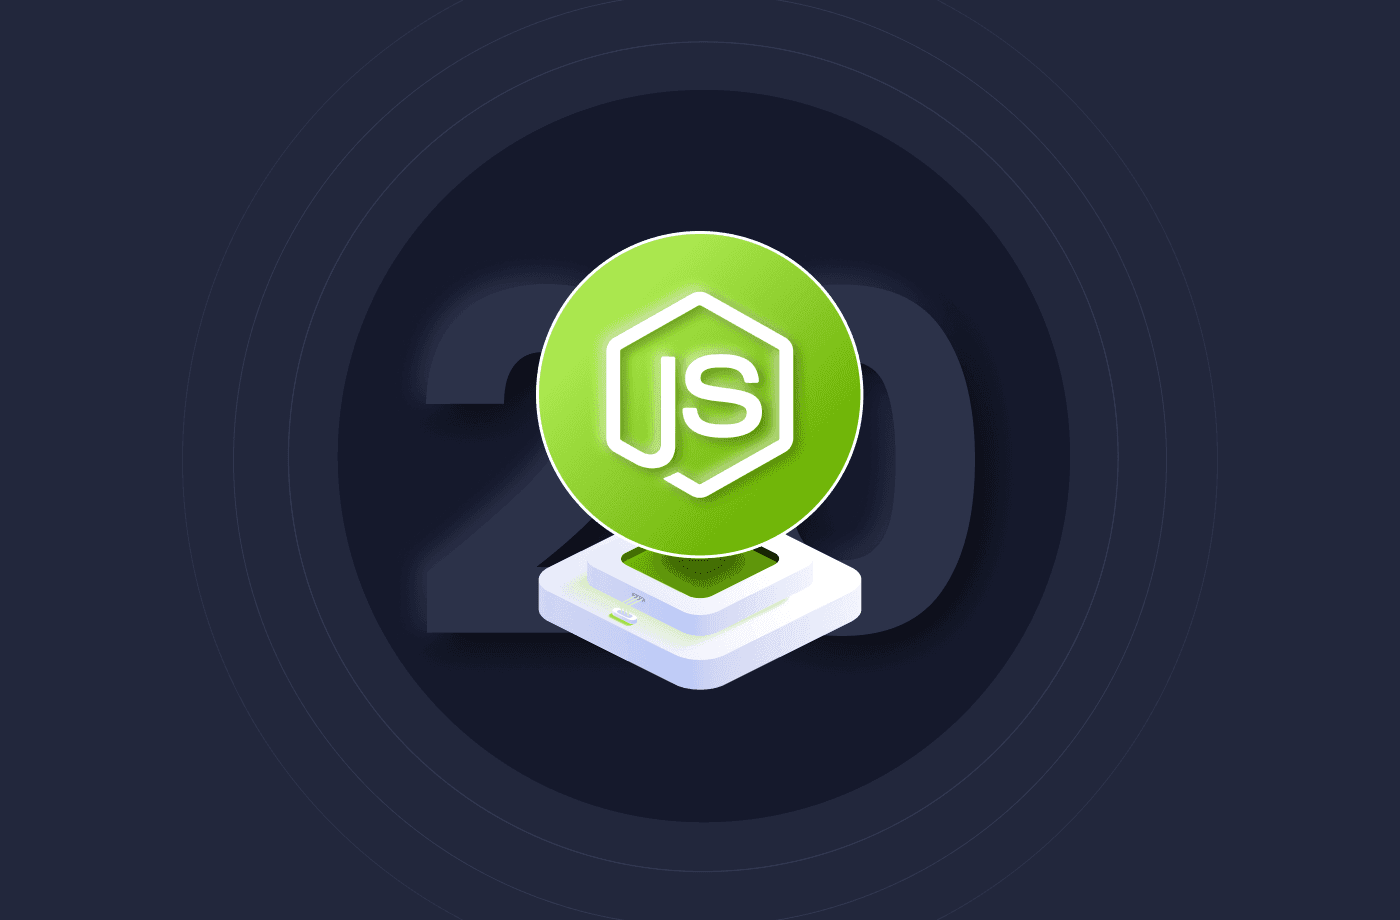 What's New in Node.js 20 for API Development